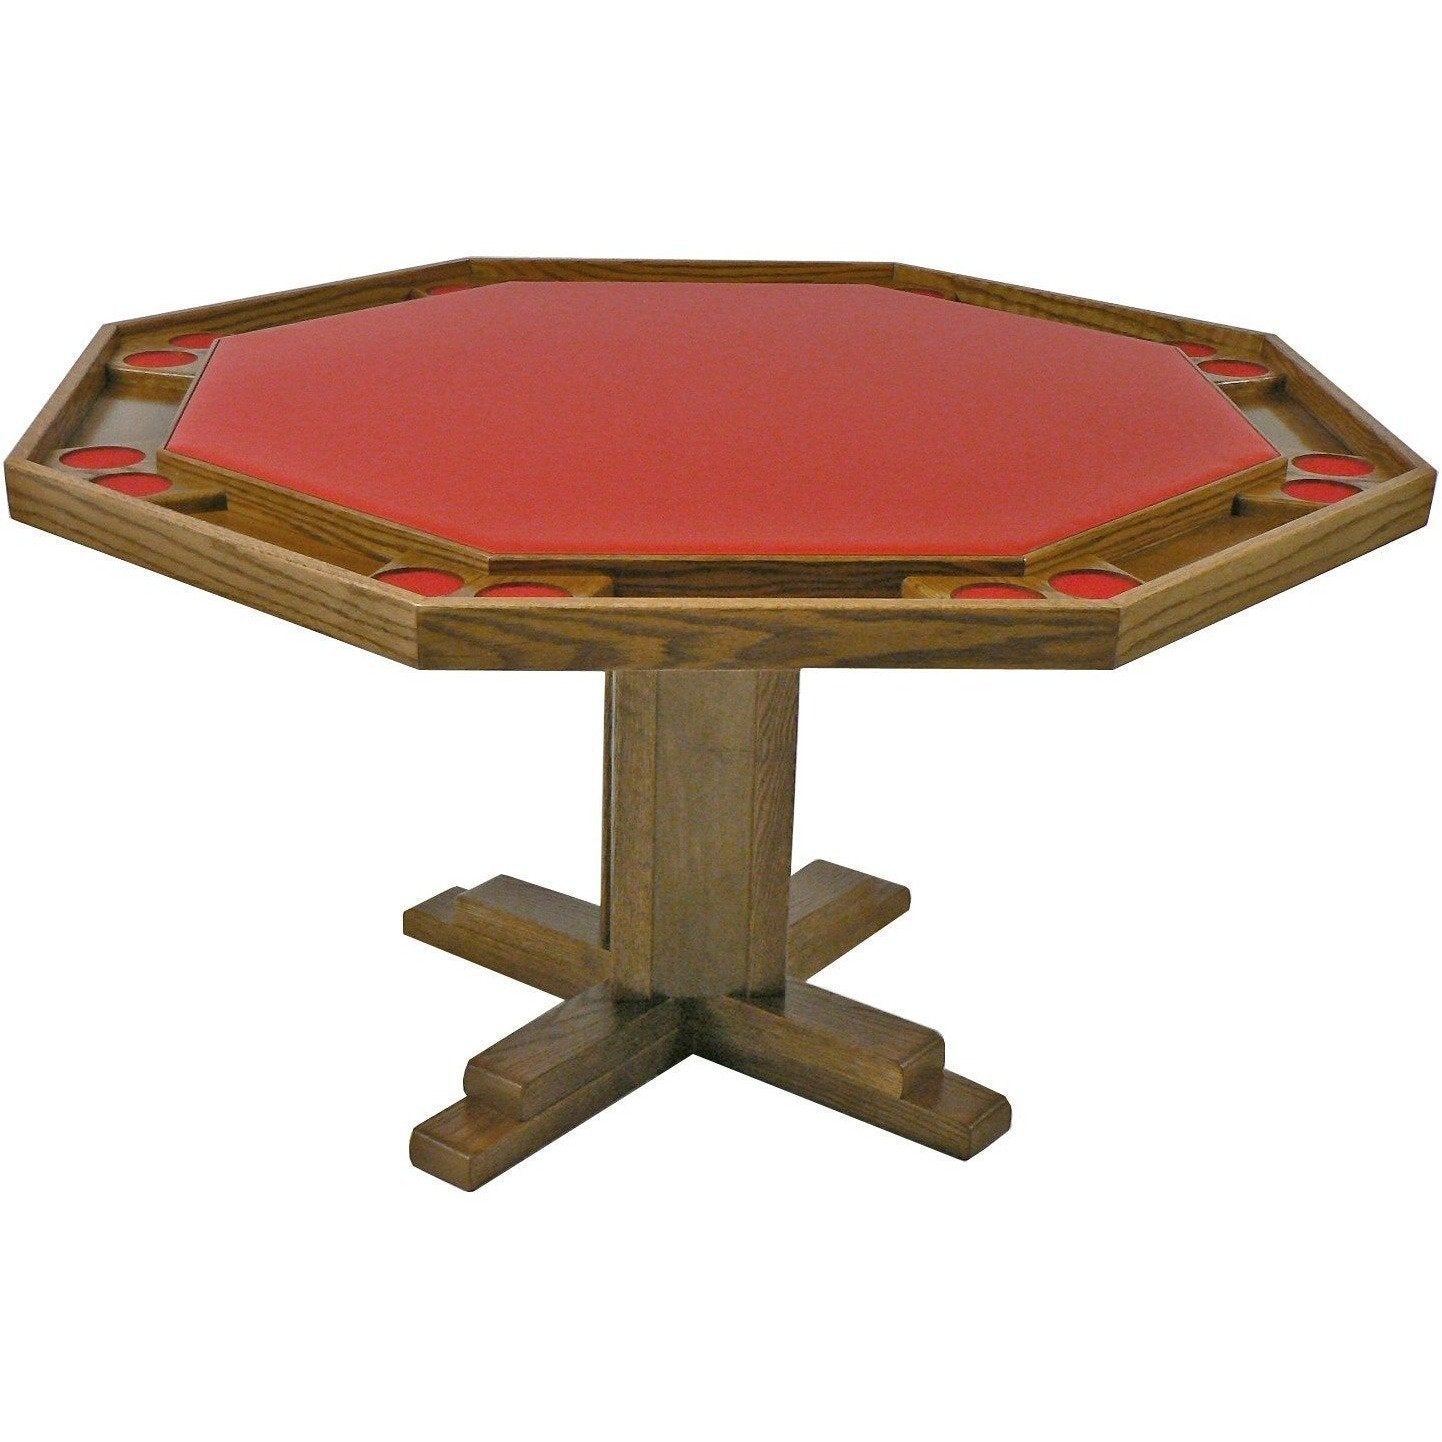 Kestell 57" Oak Octagon Poker Table with Pedestal Base 8 Person - Just Poker Tables